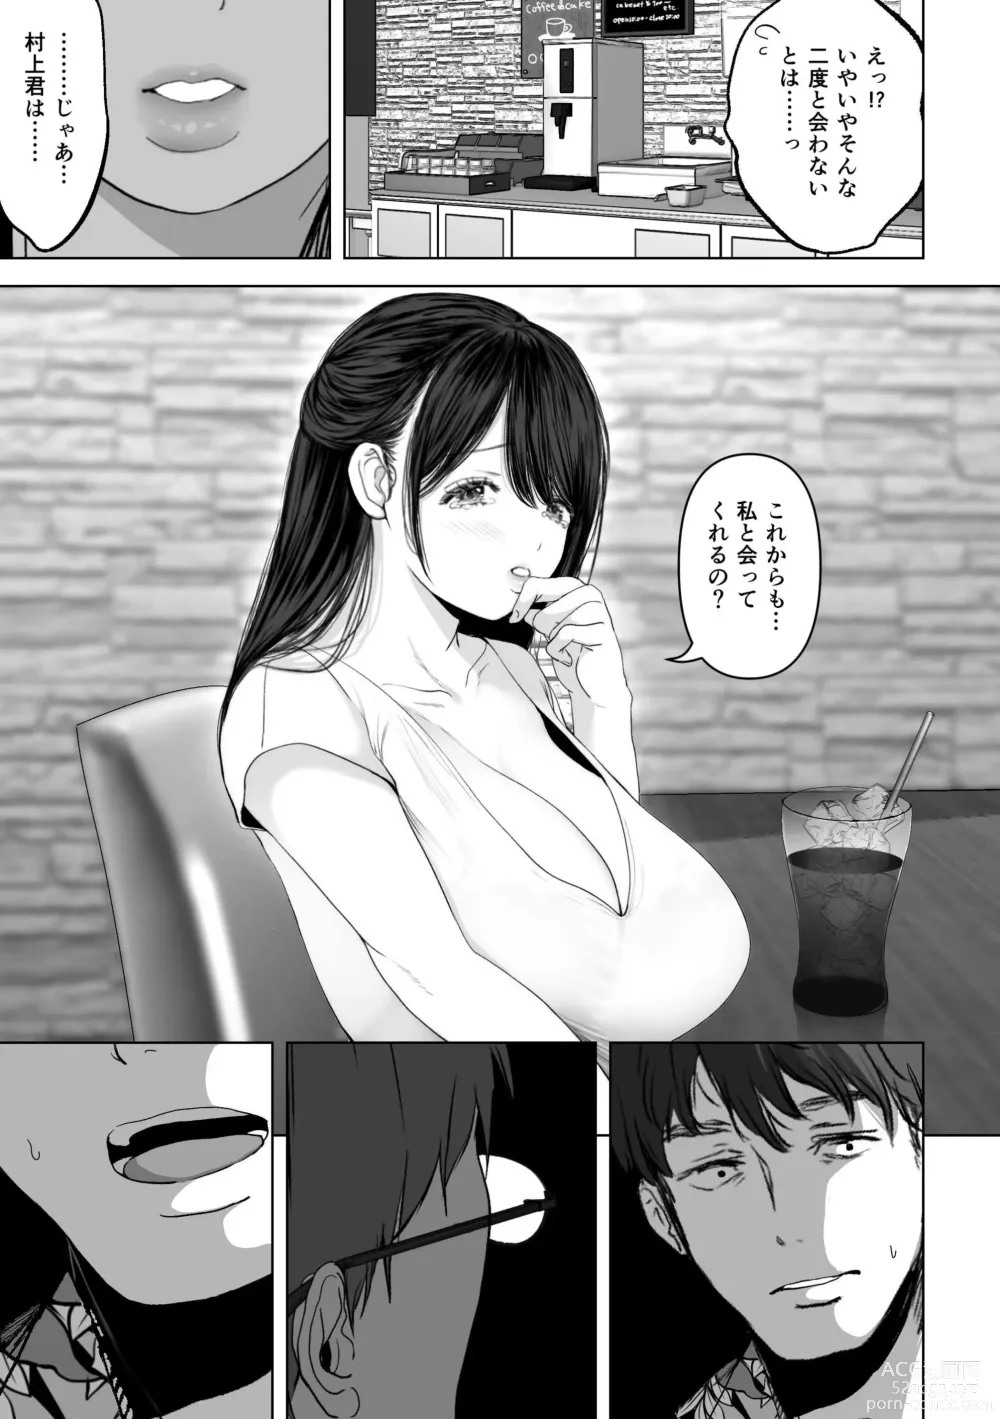 Page 14 of doujinshi If you want-4~Rich vaginal shot edition to a swaying married woman saffle~